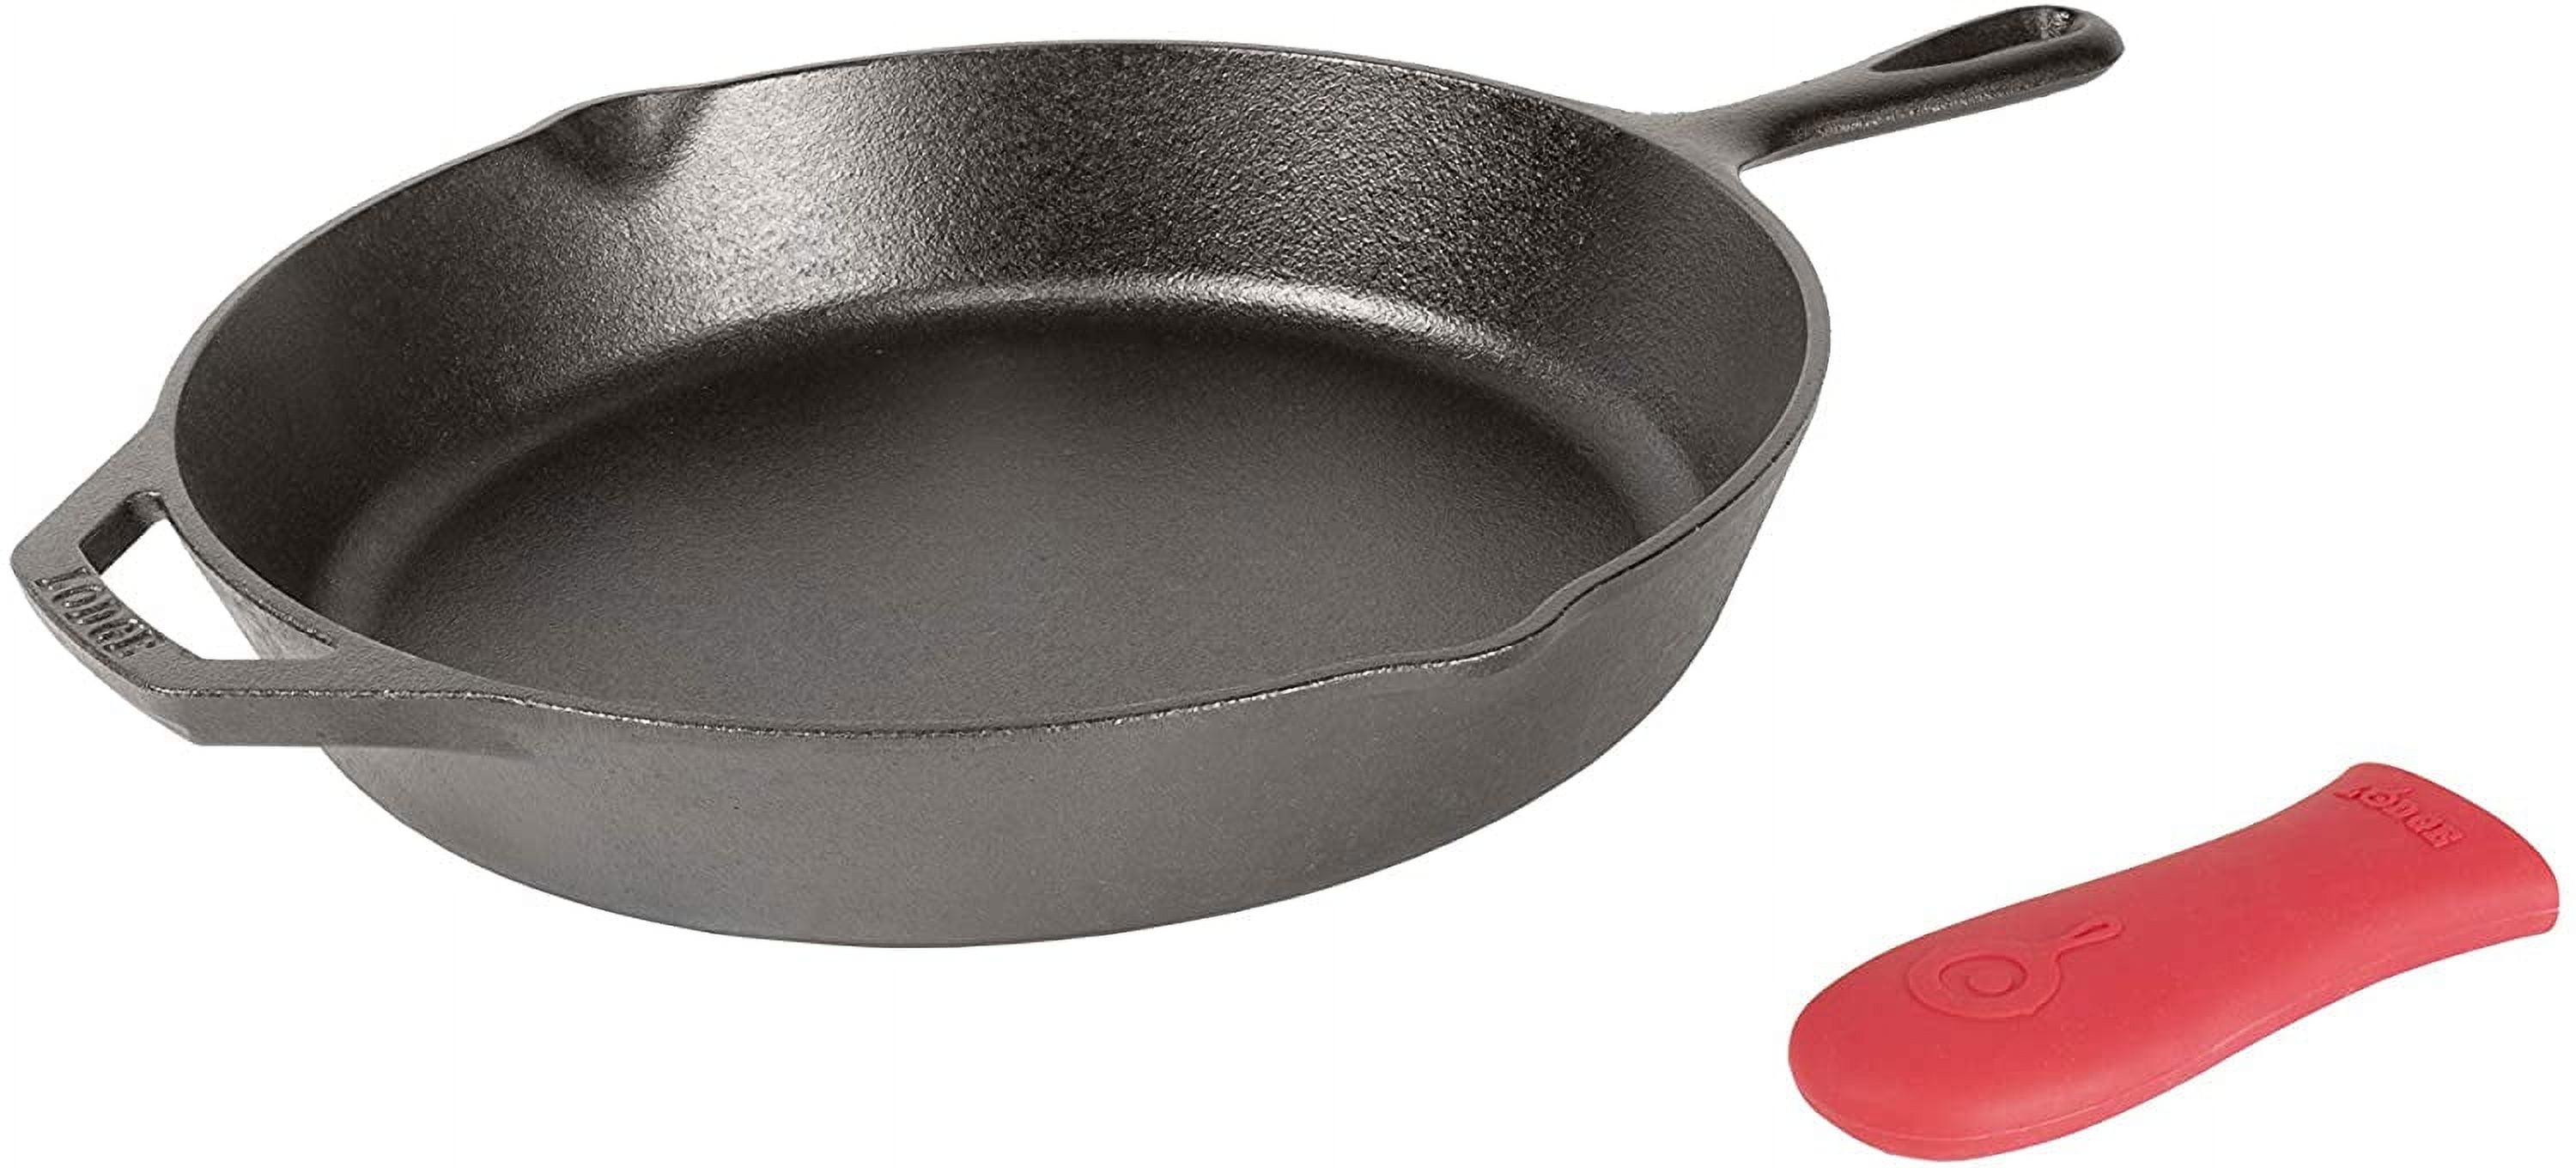 Lodge Cast Iron 11” Skillet with Silicone Handle Cover for $20 found at  Santee, CA! Wanted to share in case anyone in the area was looking for one!  : r/Costco